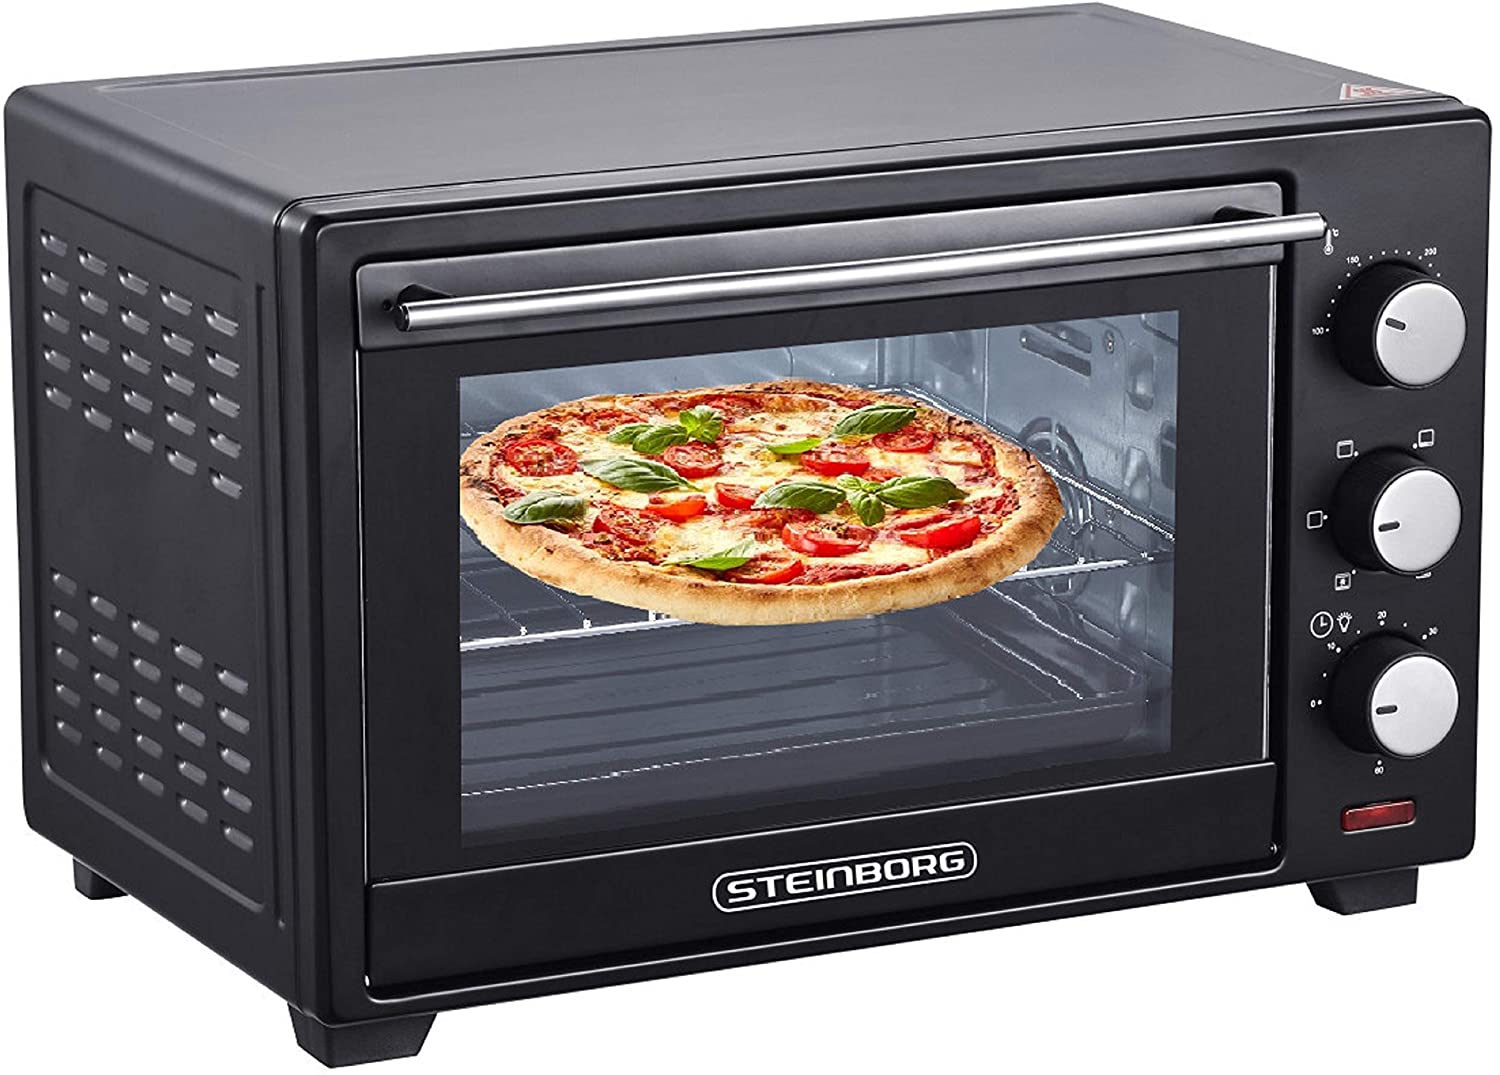 Steinborg Mini oven 25 litres pizza oven 3 in 1 mini oven with air circulation temperature control 100-250 °C removable crumb tray 60 min timer 1600 watts, 25 l